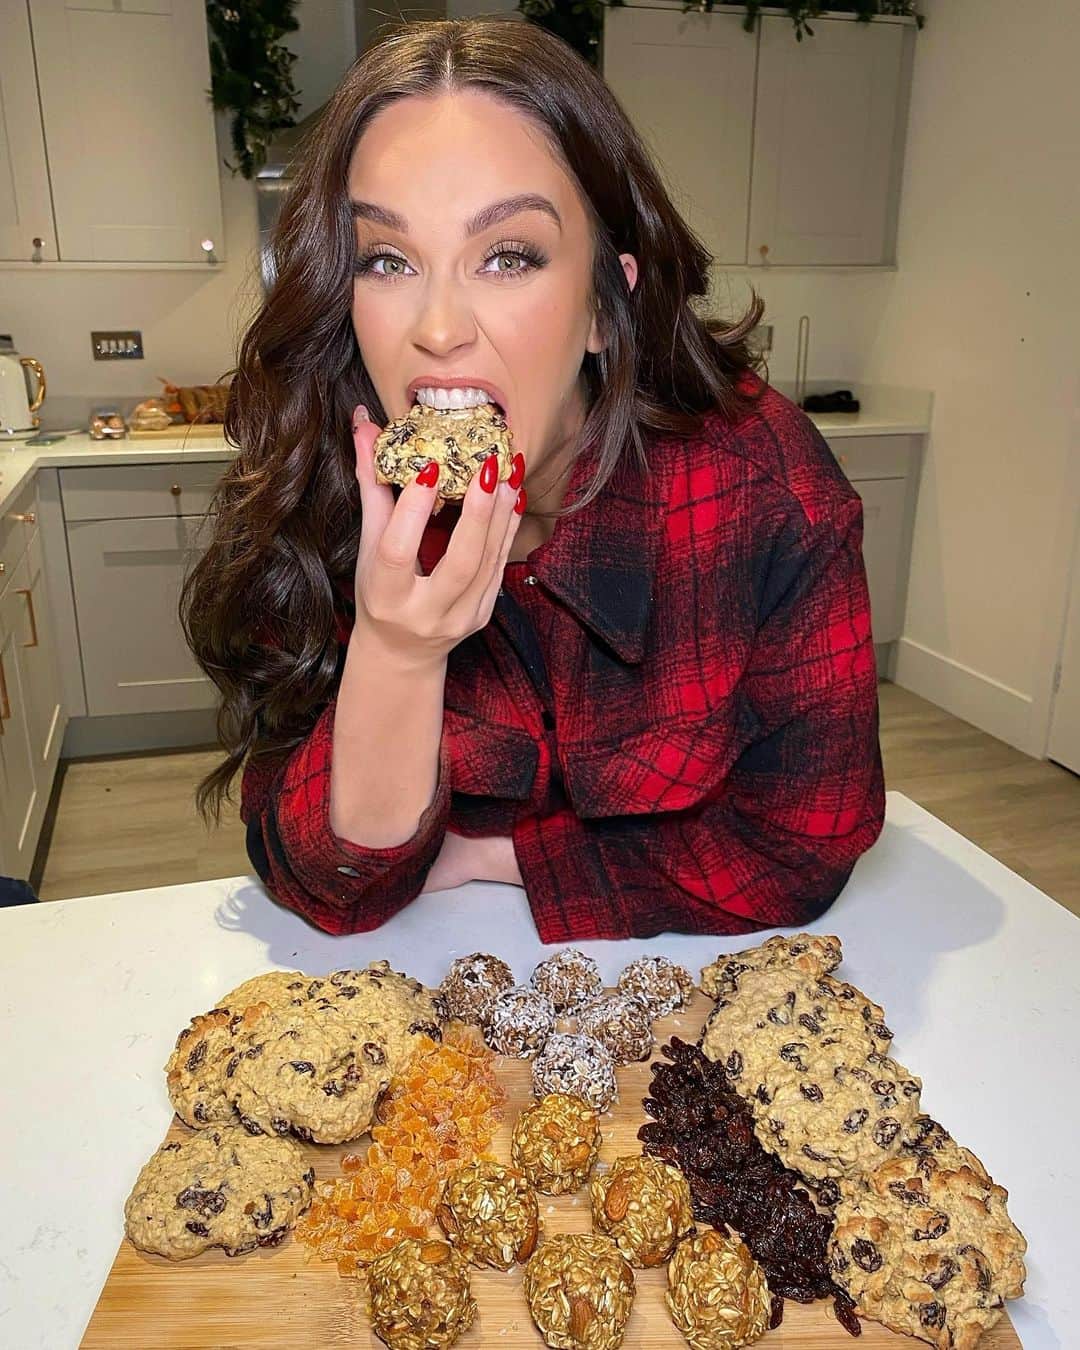 ヴィッキー・パティソンさんのインスタグラム写真 - (ヴィッキー・パティソンInstagram)「Ooh she’s back in the kitchen & having a ball! (An energy ball that is! 😂🤦🏻‍♀️ sorry about that, not my best work 😂😩)   So I haven’t been particularly disciplined with myself for quite a while, through one thing or another & now that I’m feeling a bit better I’m done making excuses & want to make some small changes, that when done consistently will garner good results! I want to feel healthy & happy again 😍   So I’m starting by upping my daily intake of dried fruit! Super simple & really easy to do but also has a whole heap of great benefits for your body!    It’s scary to learn that 73% of adults aren’t getting their standard 5 a day - now just 30g of dried fruit equals one of your five a day & it couldn’t be easier to incorporate them into your daily diet.. grab a handful of apricots as a snack, chuck some figs in a salad (ooohhh with a bit of feta maybe?! 😍) or pop some raisins in your porridge! The possibilities are endless! And once you’ve found something that works for you - you can kick back & start reaping the rewards.. Dried fruit is packed full of nutrients & are also a great source of fibre, iron & copper- & who doesn’t want more of those? 😂😍   So in support of the Dried Fruit Alliance’s #EatMoreDriedFruit campaign I got in the kitchen & whipped up some lovely little snacks using some of my fave dried fruits! You’re looking at oatmeal & raisin cookies, date & almond energy balls & dark chocolate and coconut energy balls! They were all delicious if I do say so myself 😂 If you’re really on the health kick I’d suggest trying the energy balls, which are about 80-100kcals per ball & packed full of dried fruit, fibre & healthy fats! But if you are just looking to slowly wean yourself off the quality street & mince pies- why not try these oatmeal raisin cookies! They’re choc full of raisins & oats & are a major hit with the little ones- such a crafty way to get one of their 5 a day in them! 😂😍   So guys, I suggest we don’t be too hard on ourselves this Jan- last year was tough & lockdown is the worst- so instead be kind to yourself & make small changes to your diet which will make you feel loads happier & healthier ❤️ AD   #eatmoredriedfruit」1月26日 4時37分 - vickypattison